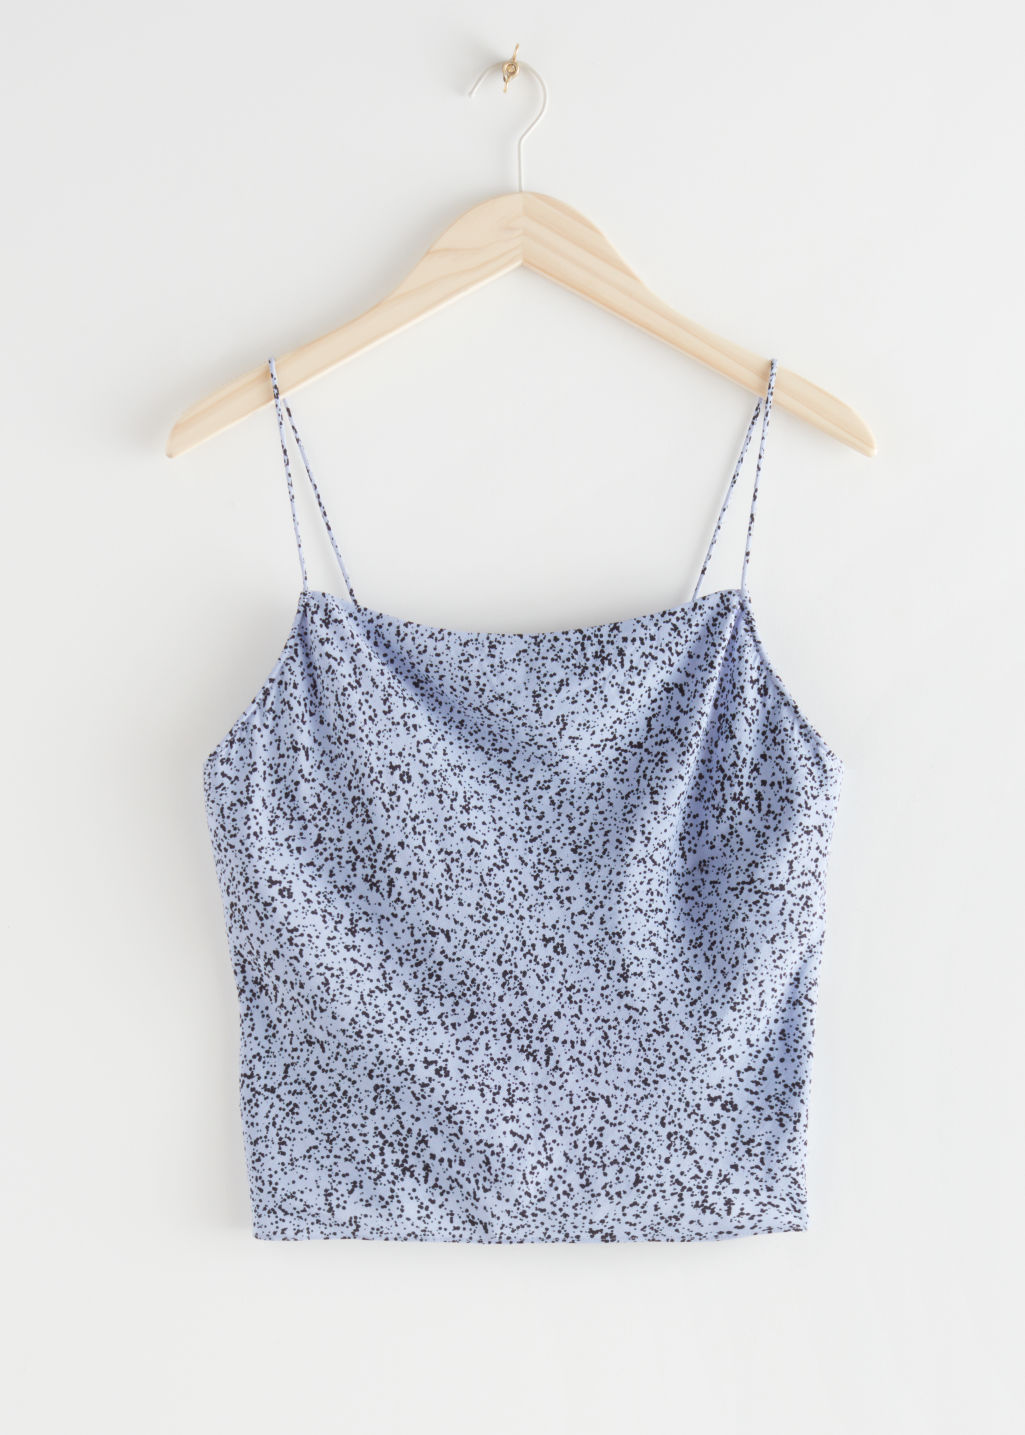 Satin Cowl Neck Tank Top - Blue Freckles - Tanktops & Camisoles - & Other Stories